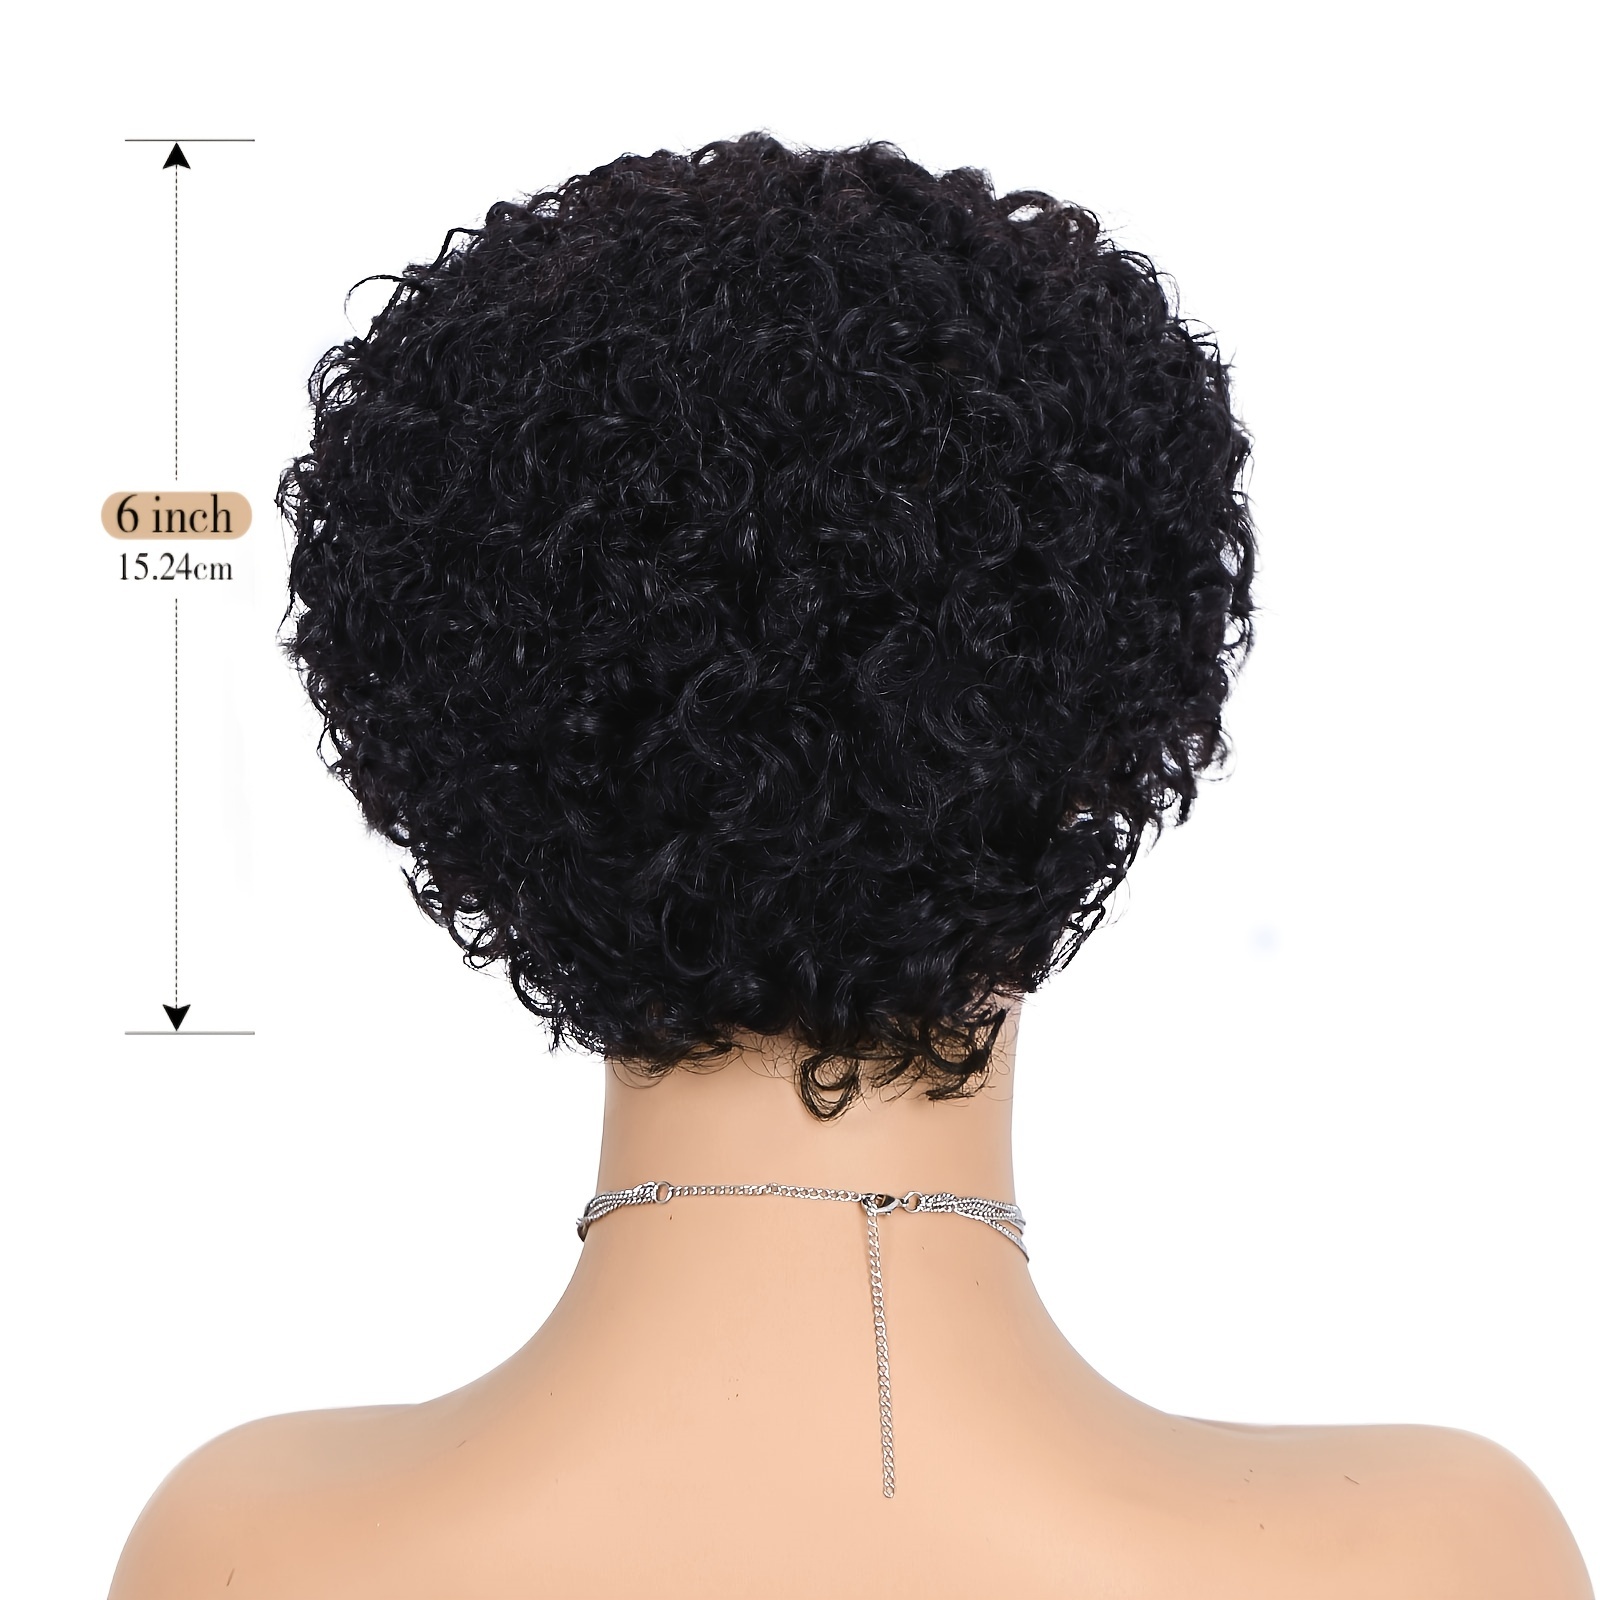 Lace S Short Natural Hair Wigs Curly Wave Side Part Short Bob Pixie Cut  Brazilian Remy Deep None Front For Women 230420 From Bong06, $17.93